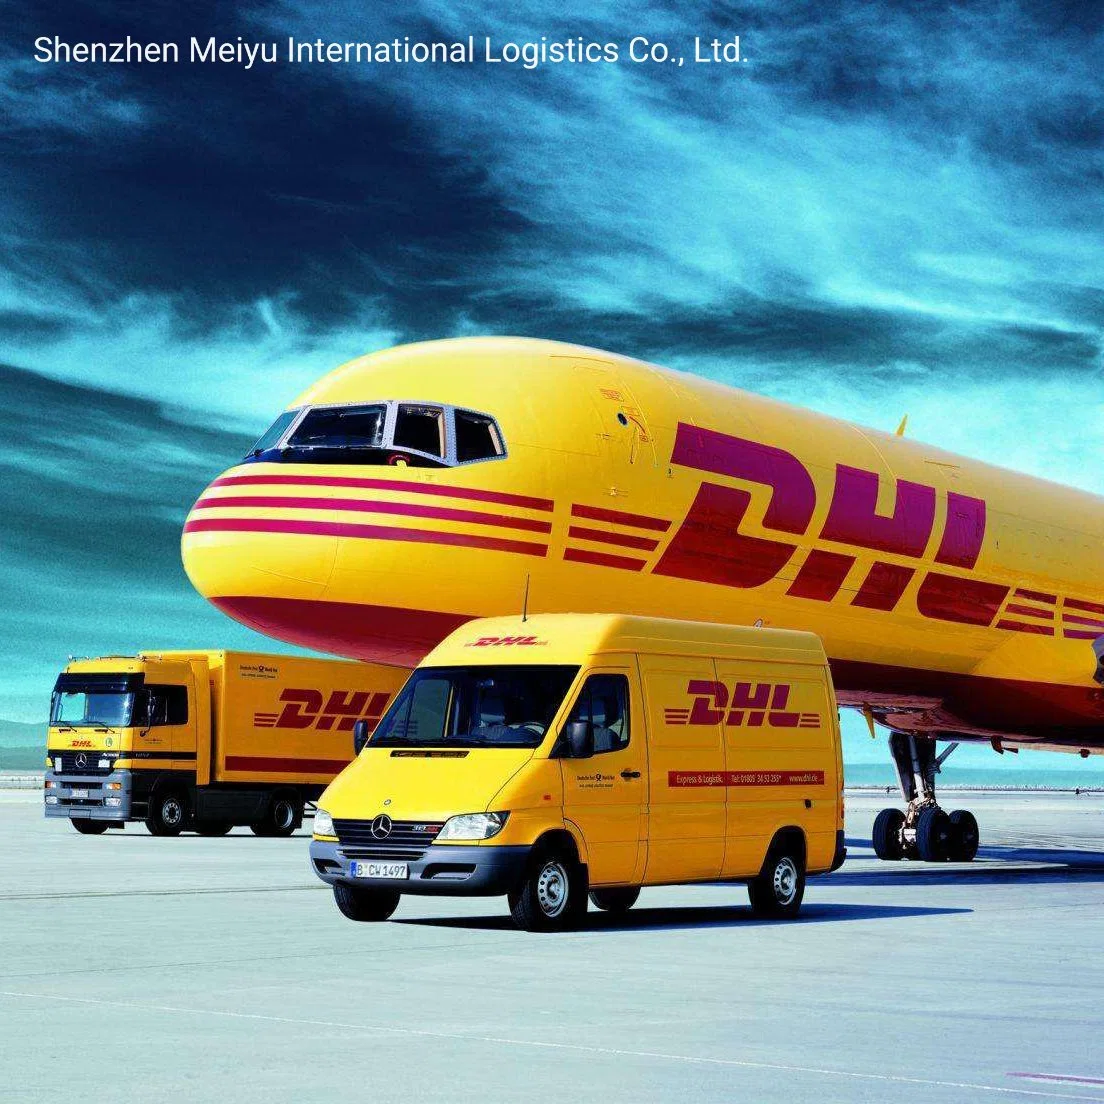 Global Logistics International Freight Forwarder Professional Cheapest Courier Express Service to All Over The World